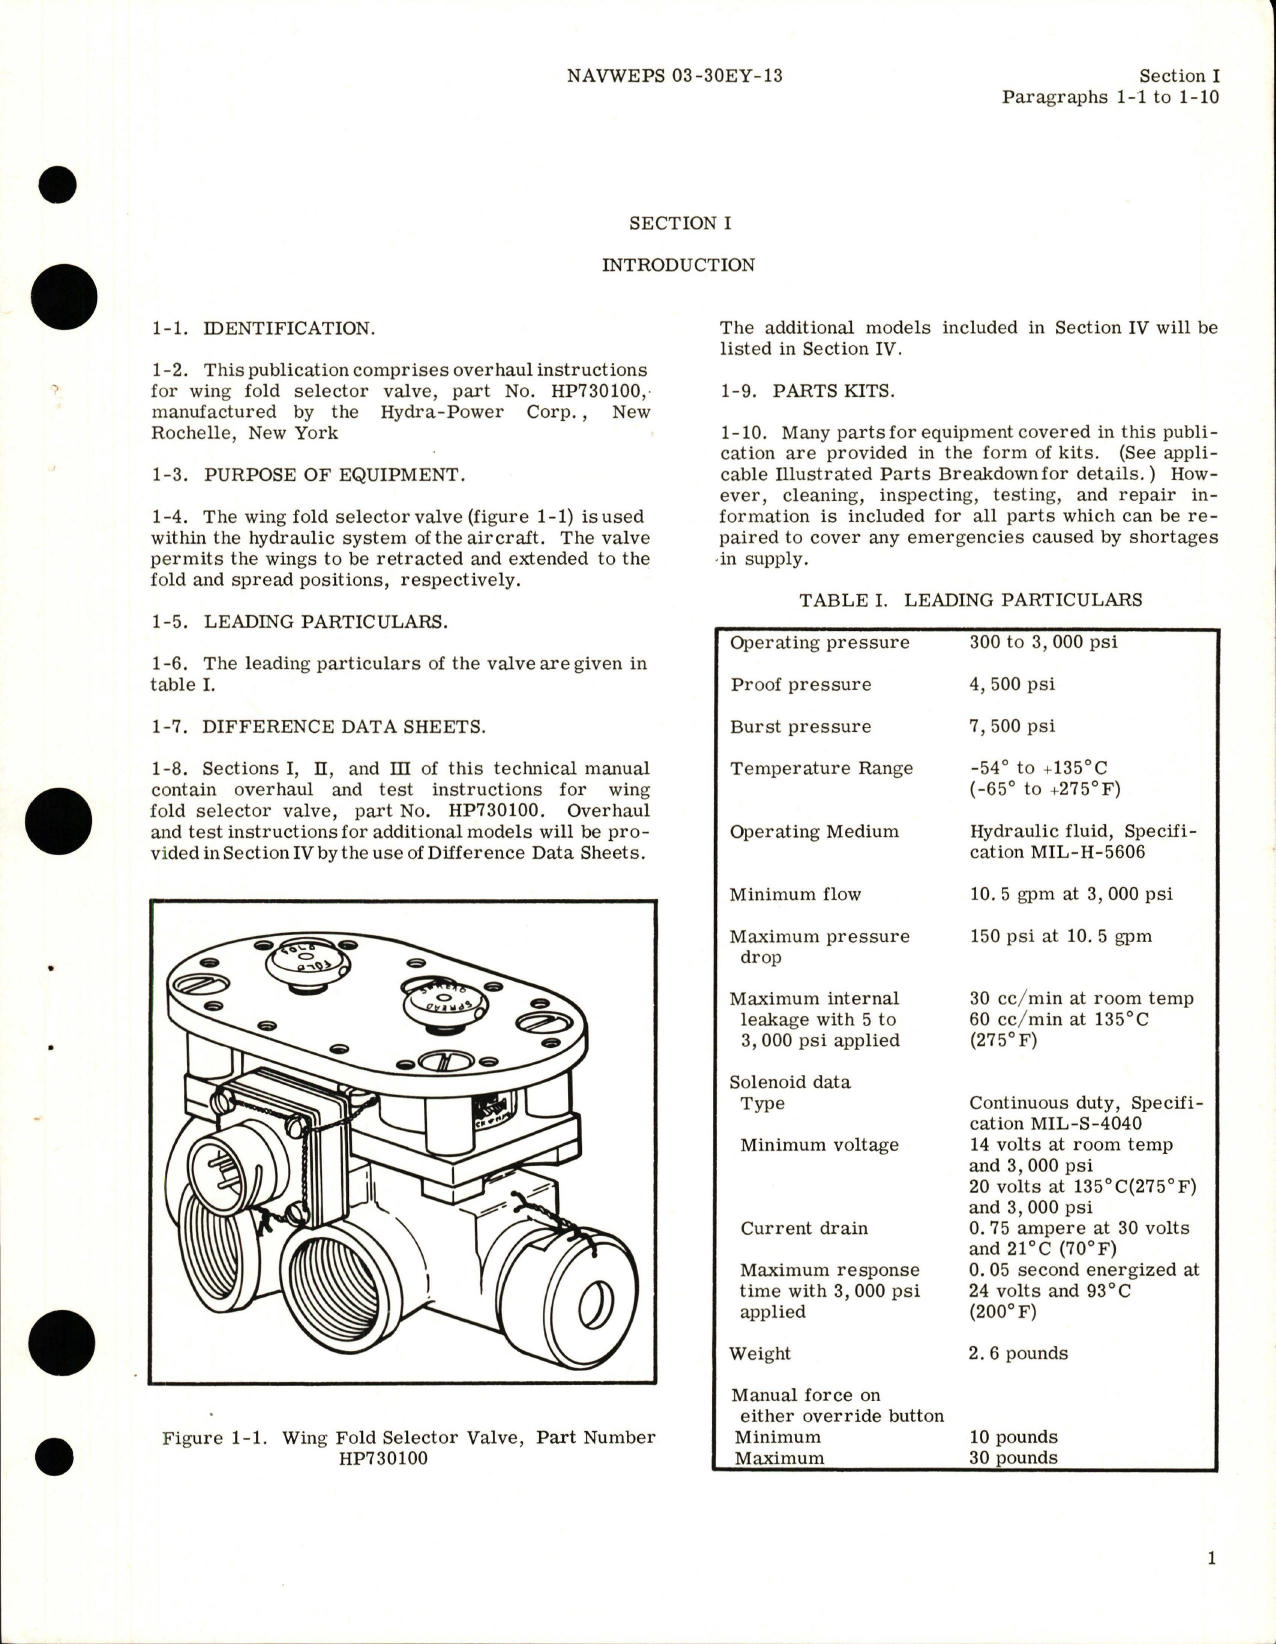 Sample page 5 from AirCorps Library document: Overhaul Instructions for Wing Fold Selector Valve - Part 730100